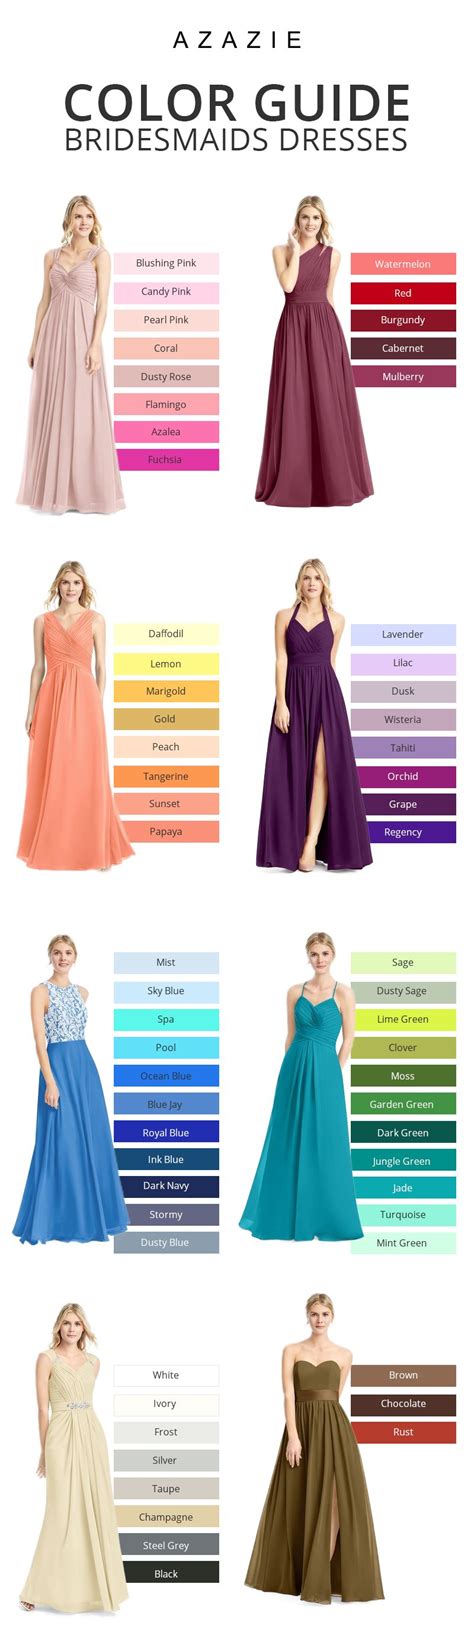 A Bride S Best Friend Azazie Offers 50 Colors For You To Choose From